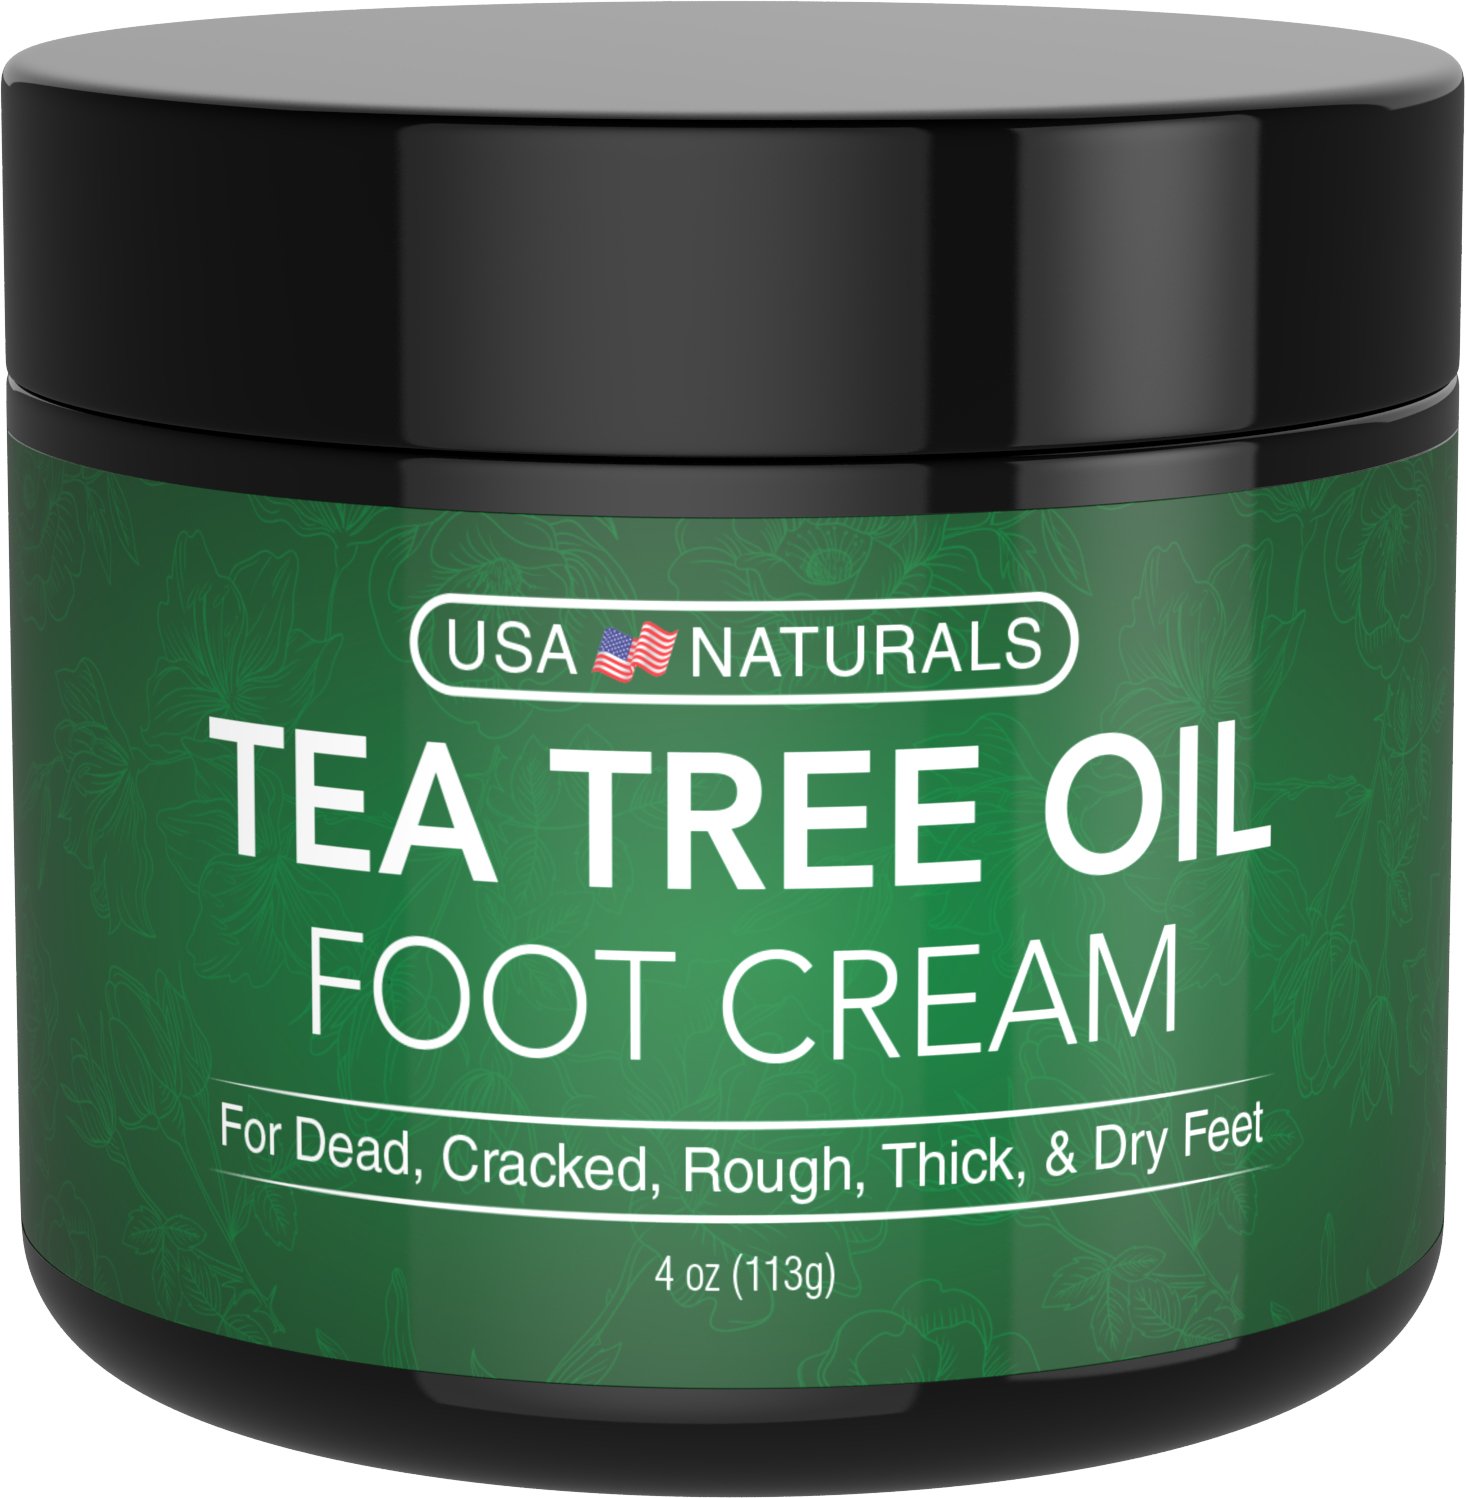 Tea Tree Oil Foot Cream - Instantly Hydrates and Moisturizes Cracked or Callused Feet